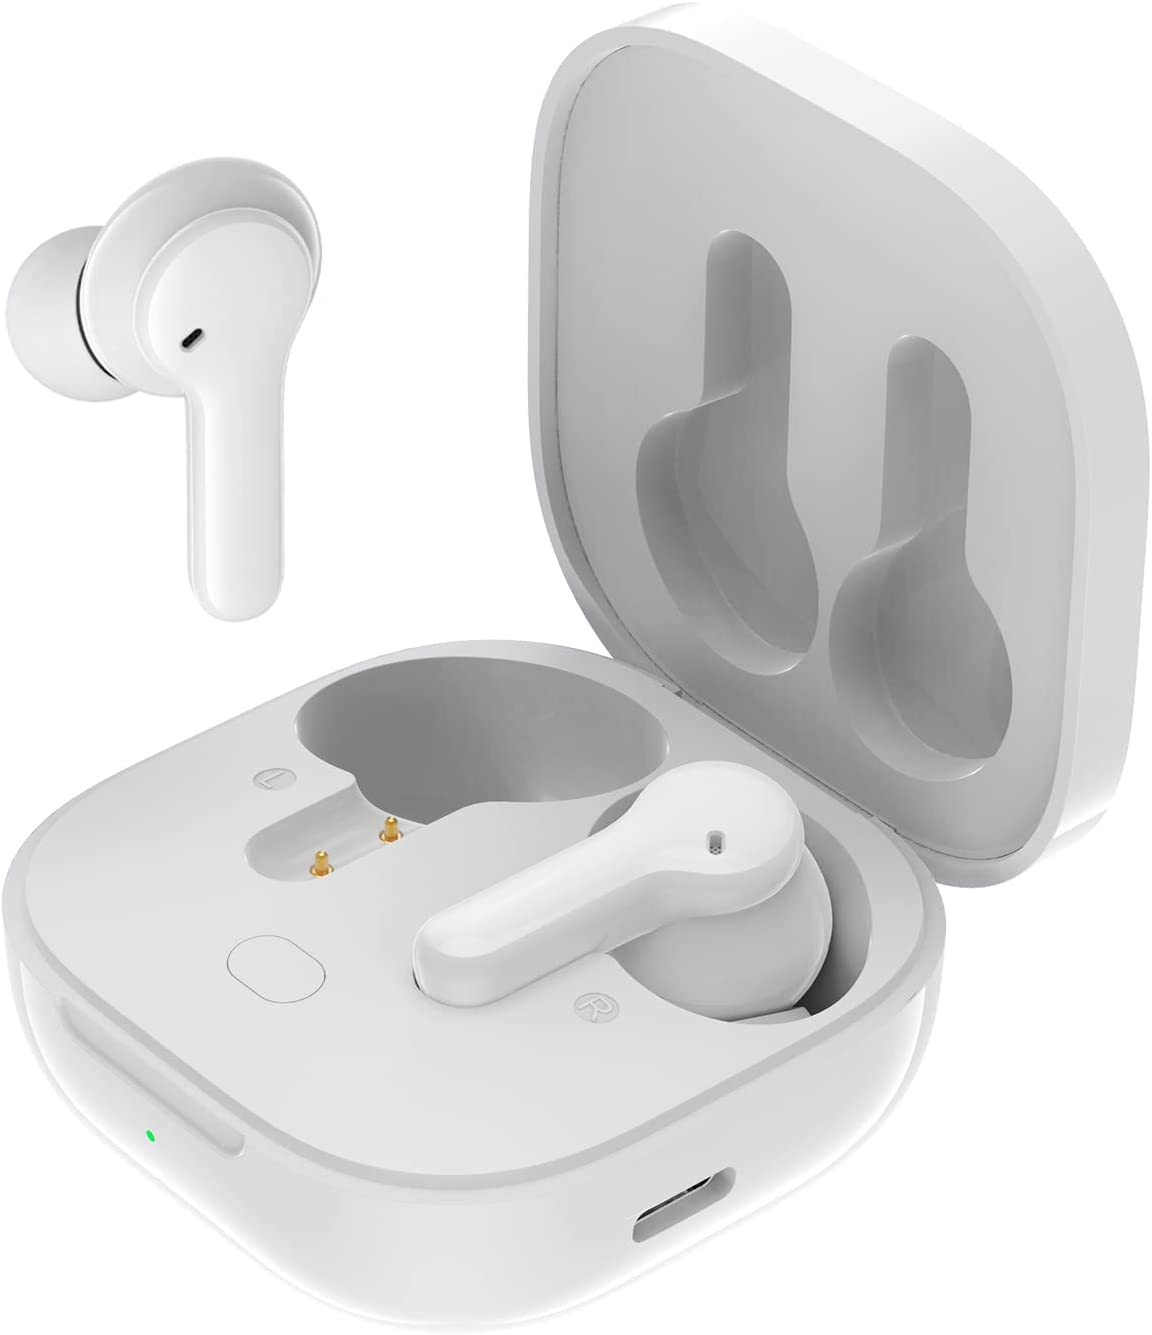 QCY T13 Wireless Bluetooth Earbuds, TWS Waterproof in Ear Headphone ENC Noise Cancelling, Deep Bass, Touch Control Ear Buds, HIFI Stereo 30H Playtime Earphone for Android iPhone, White